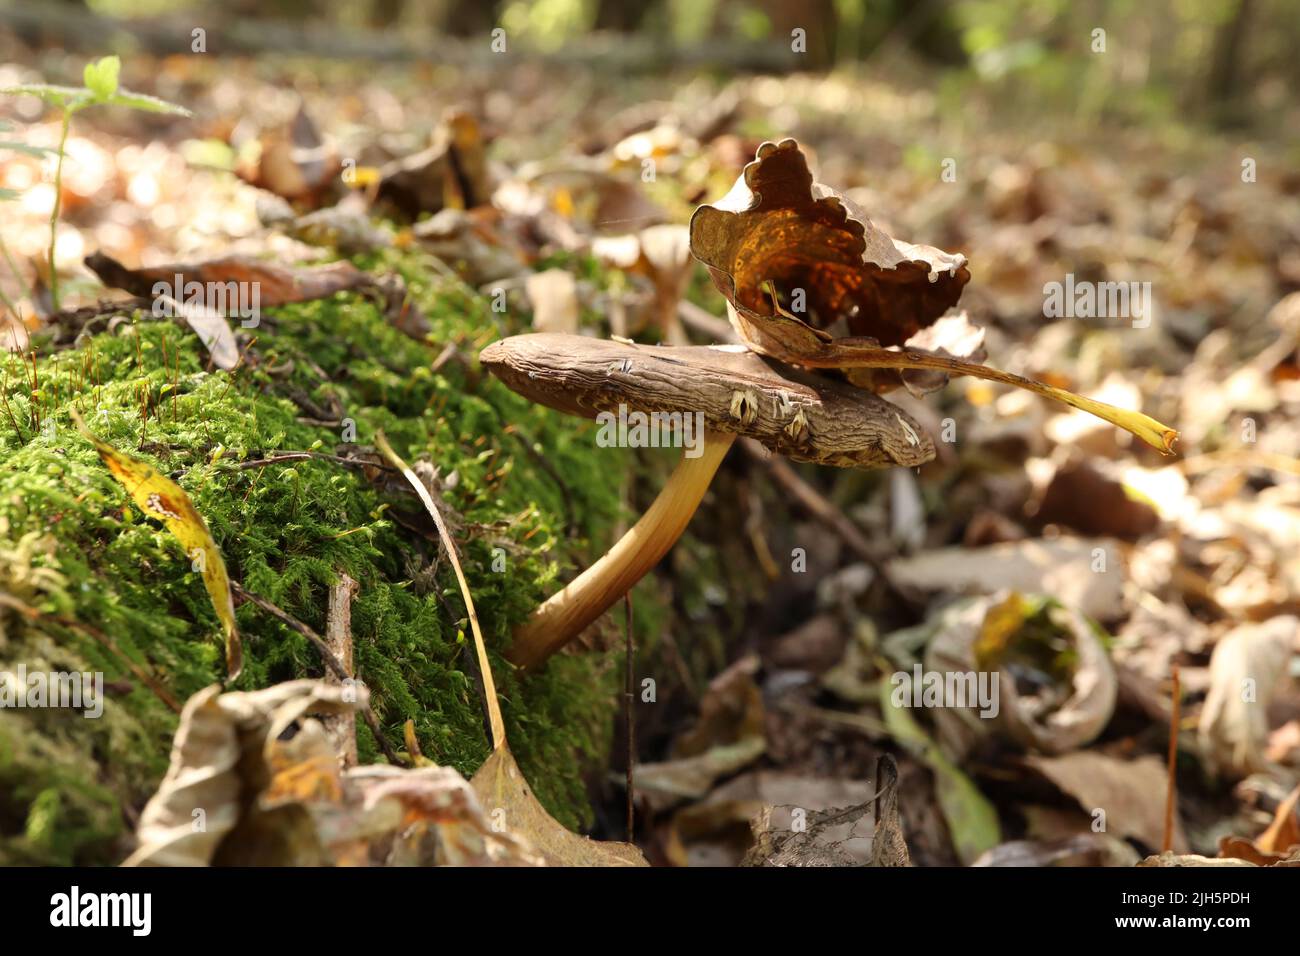 Lepiota aspera in the autumn forest with dry leaves Stock Photo